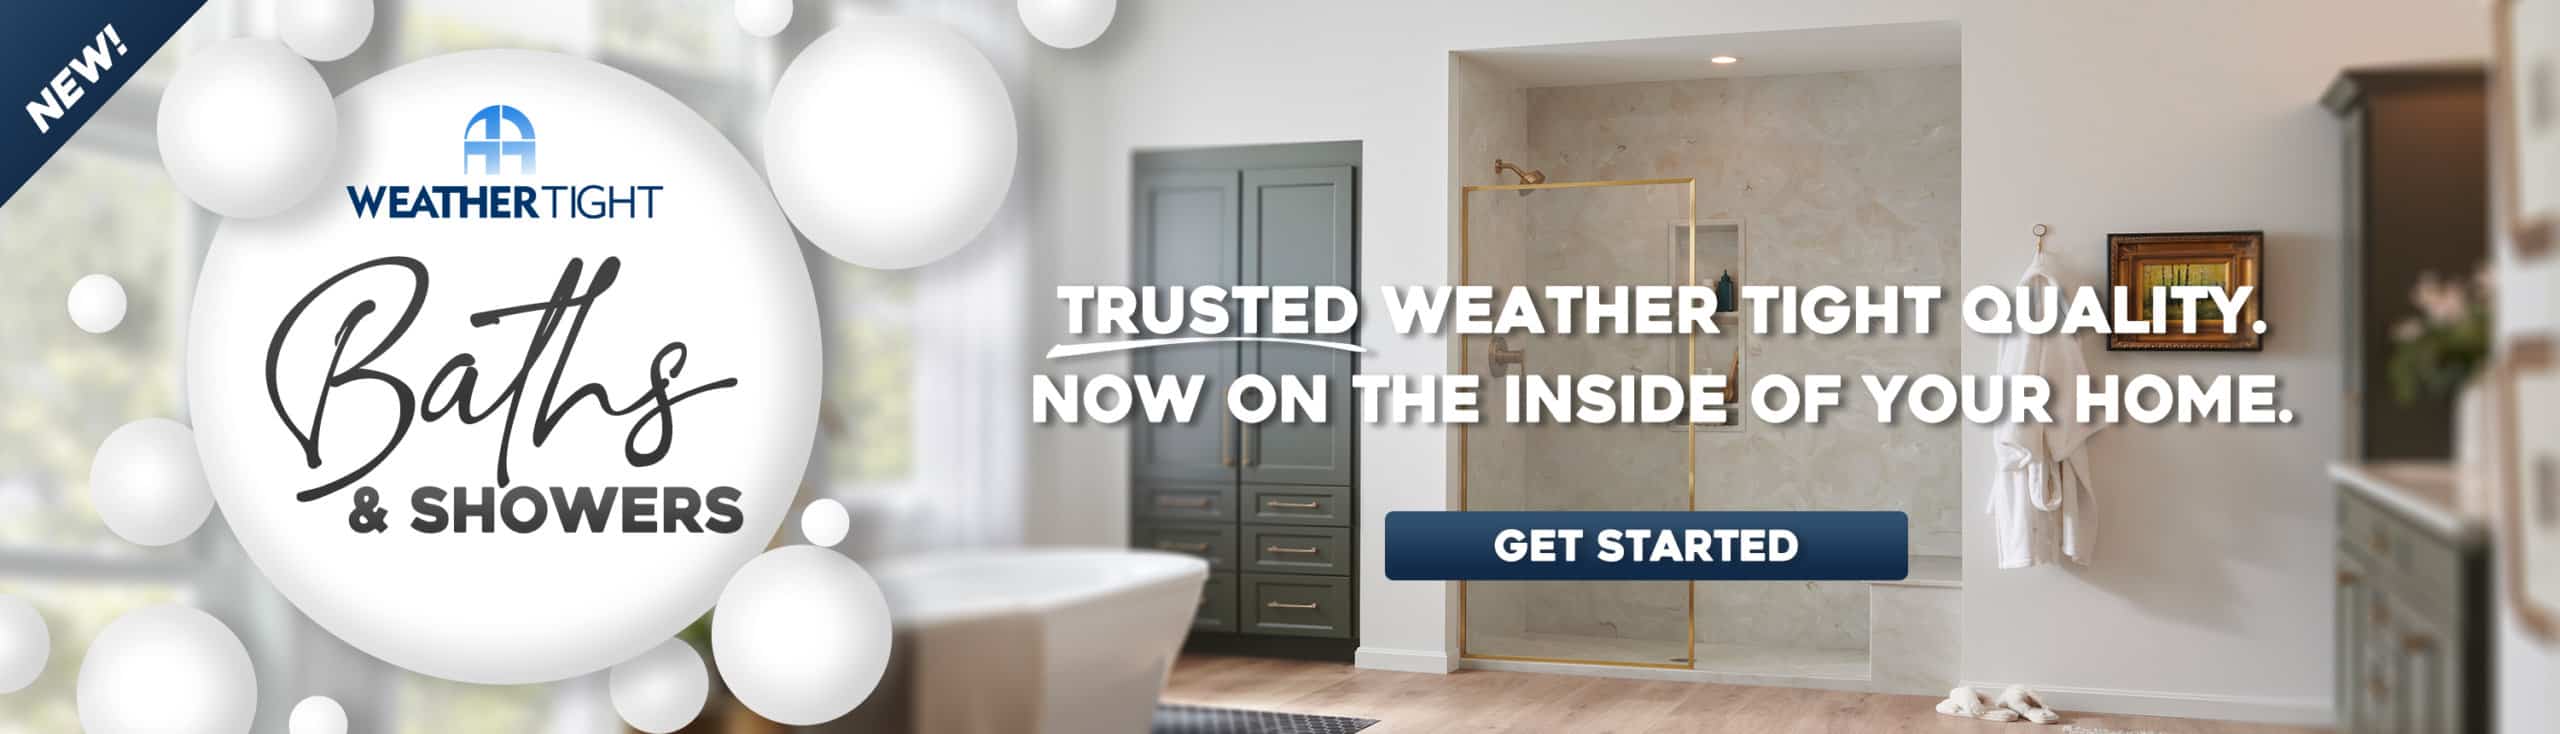 Weather Tight Baths - Trusted Weather Tight Quality Now On The Inside Of Your Home